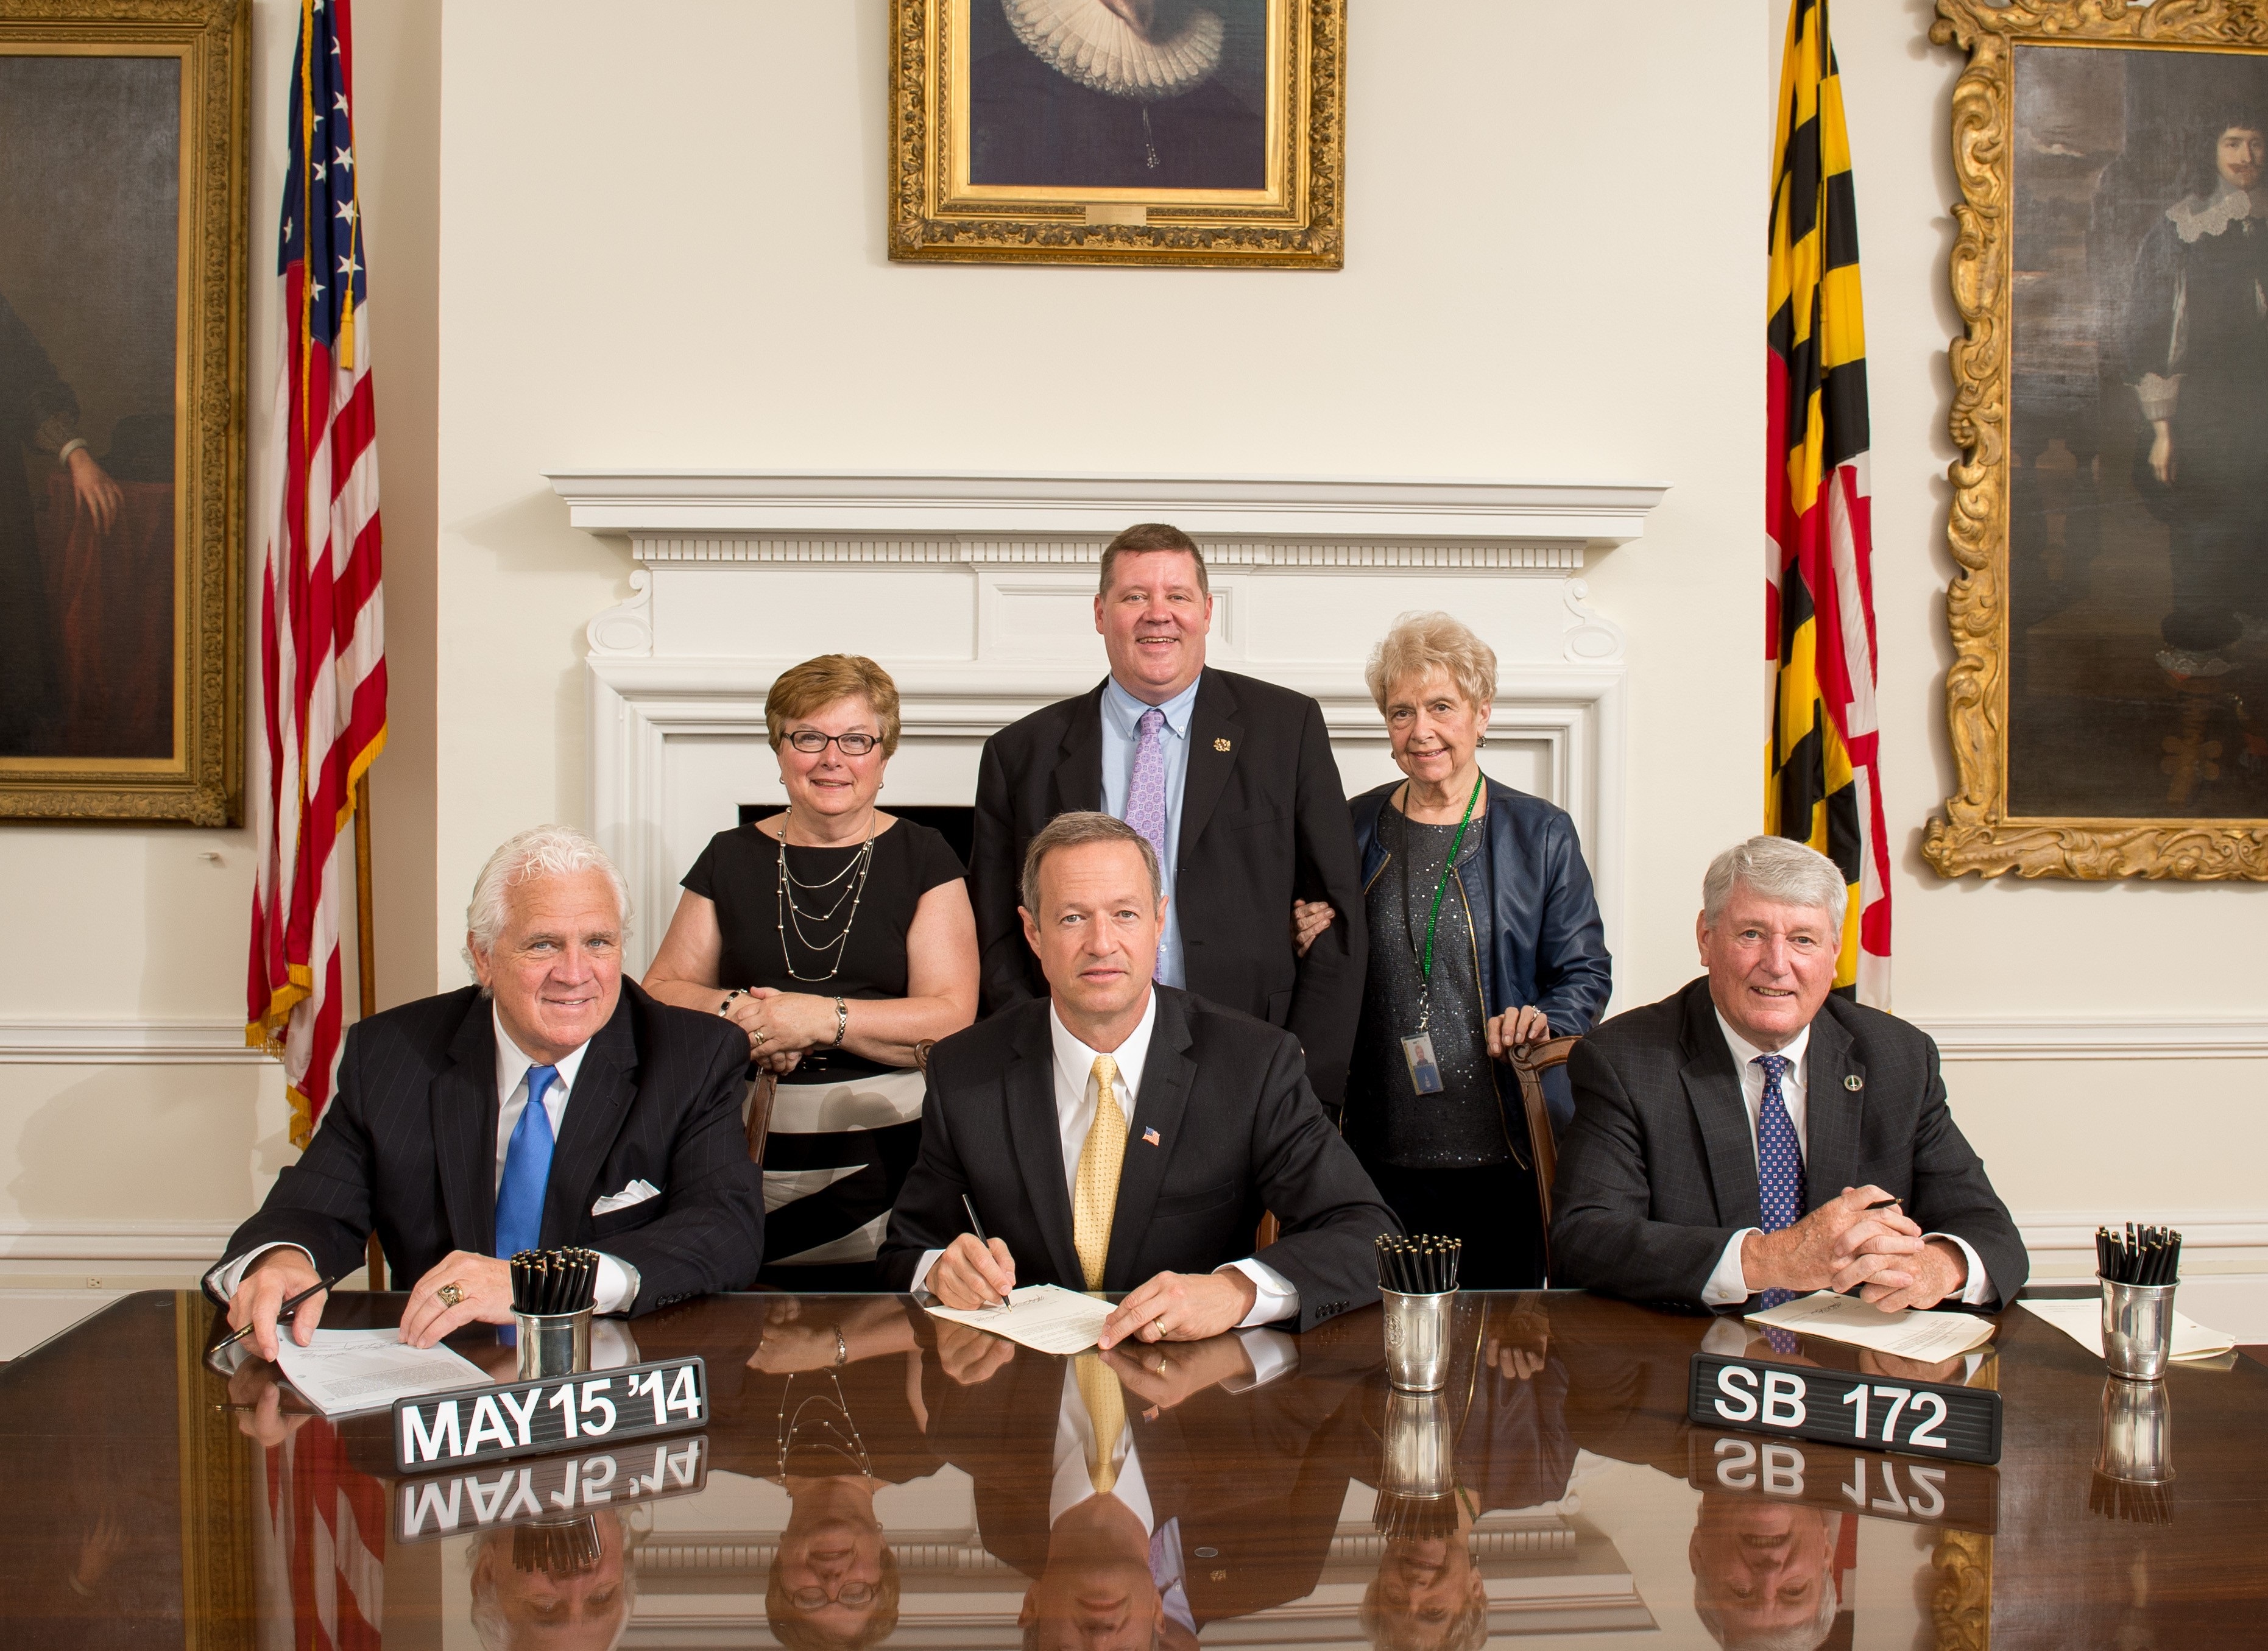 Budget bill signed by O’Malley contained unconstitutional provisions, Gansler says